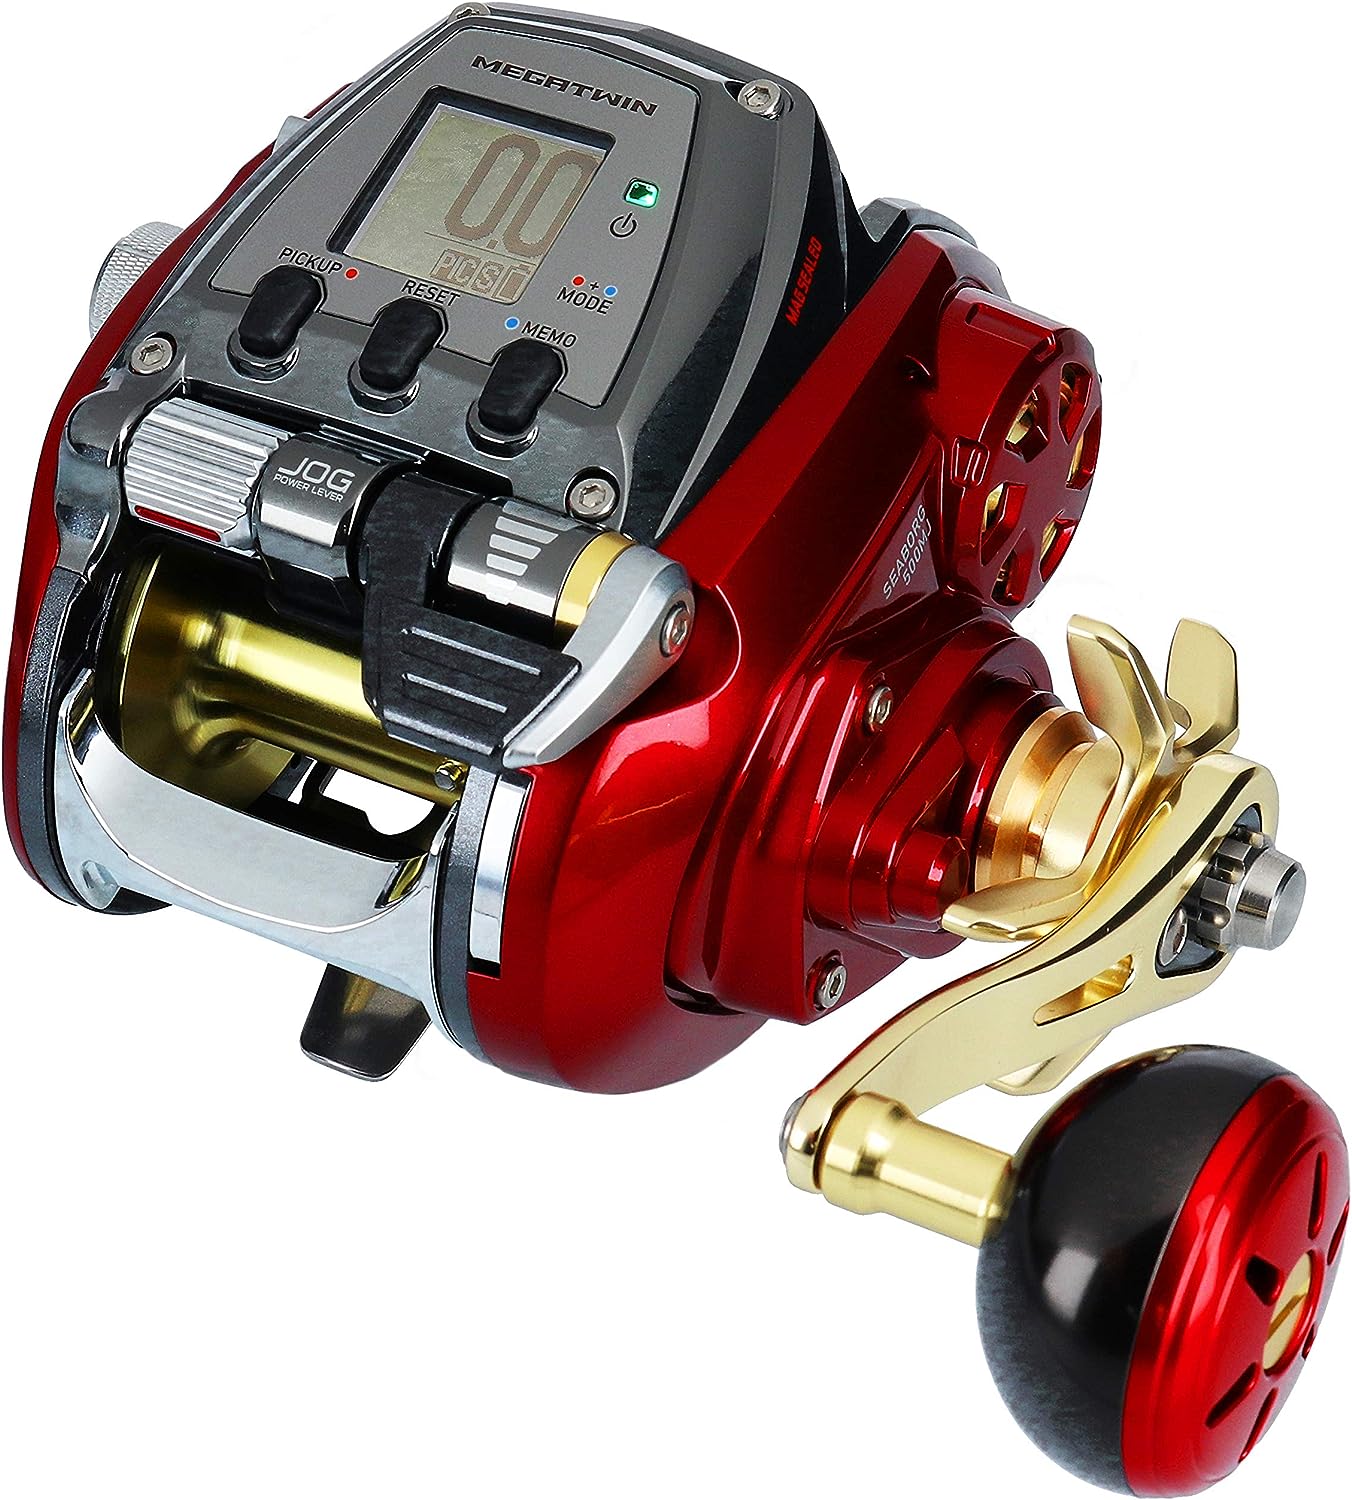 DAIWA Electric Reel Seaborg 500MJ Right Handle 2019 Model - Discovery Japan  Mall